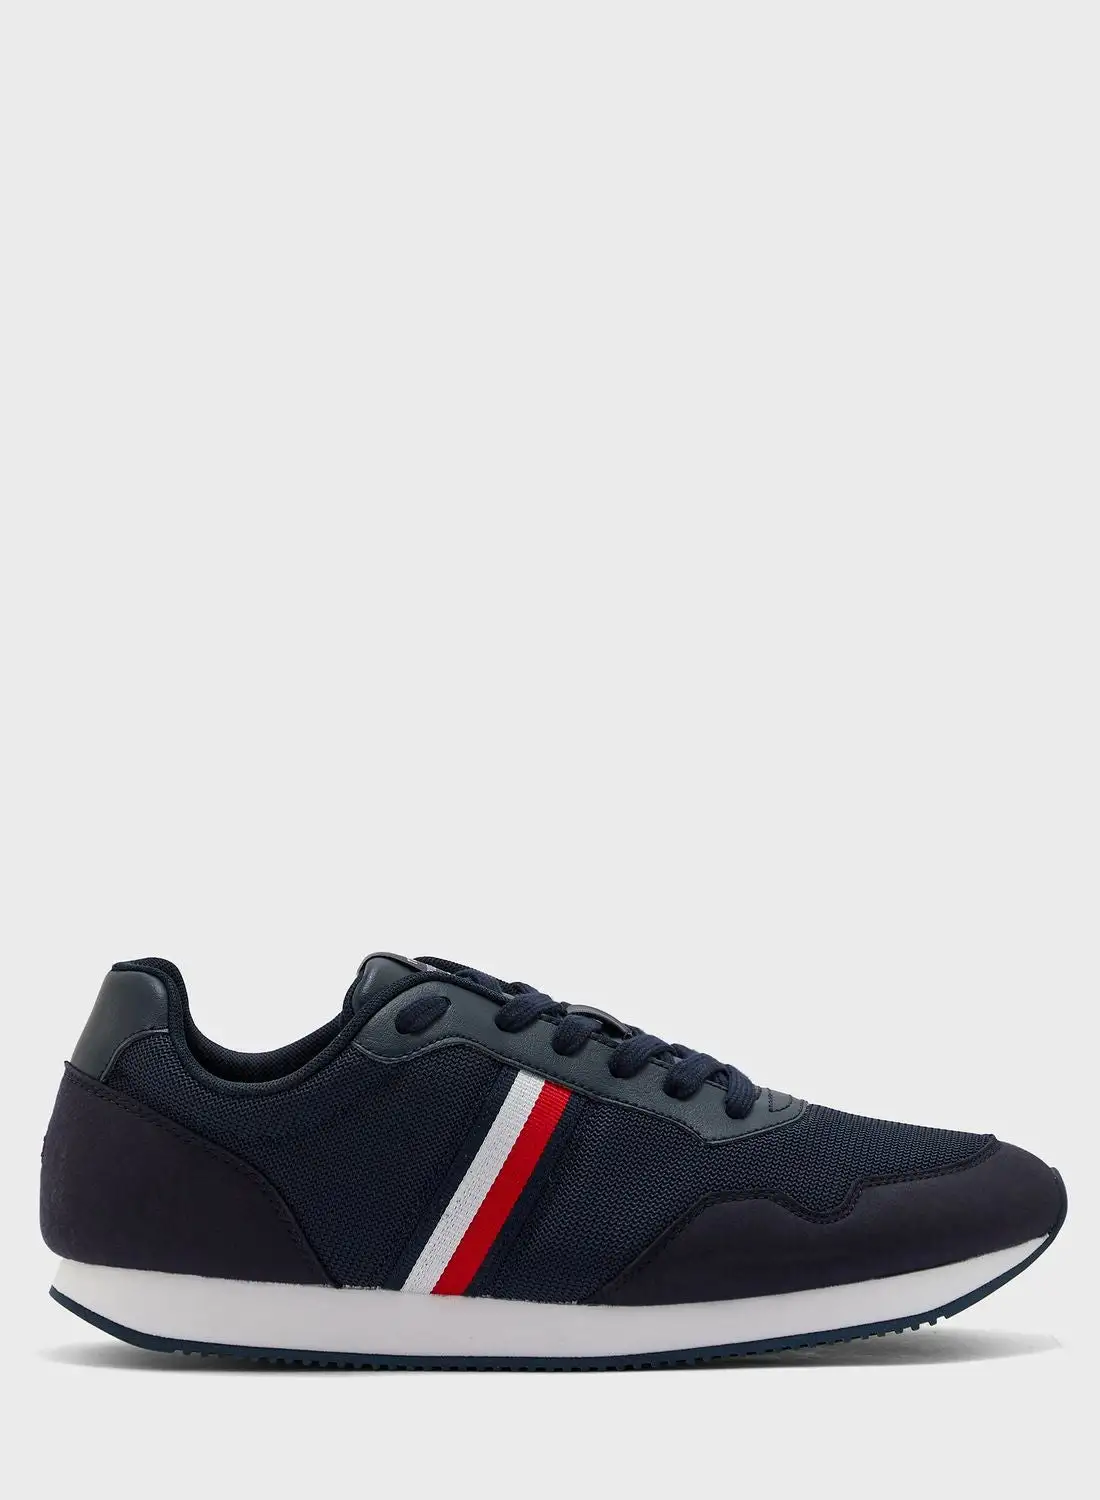 TOMMY HILFIGER Logo Print Low Top Sneakers